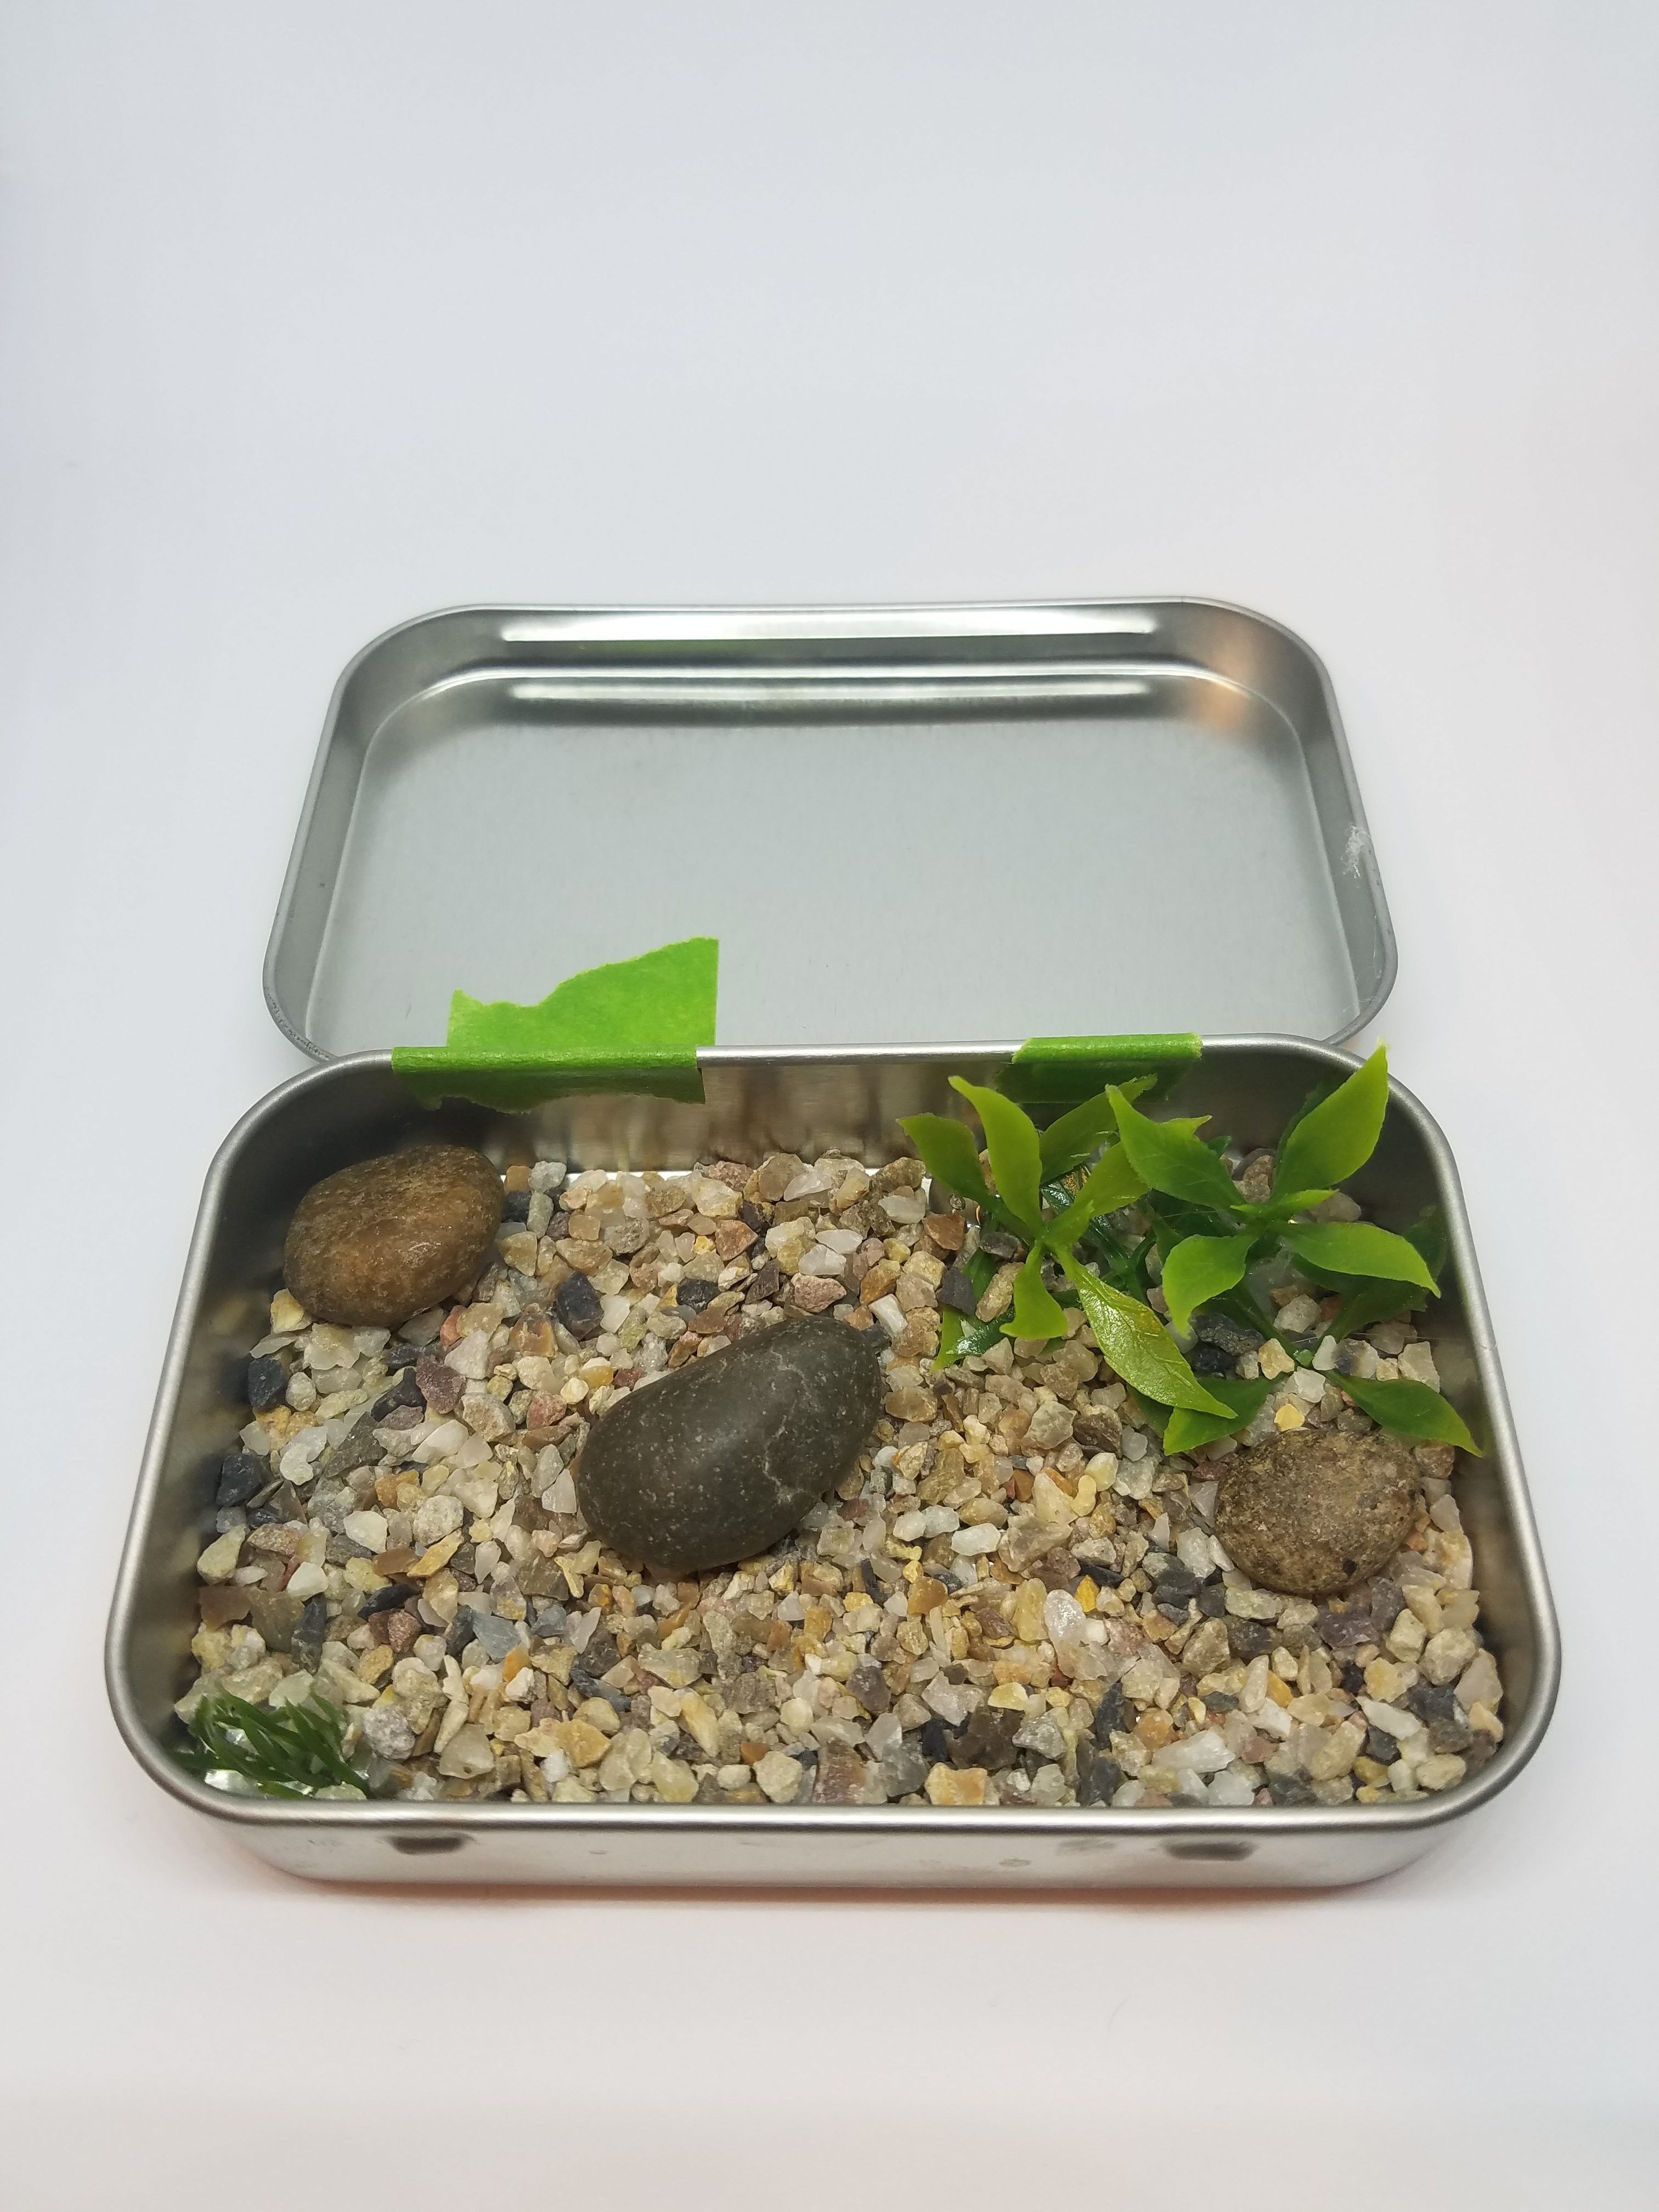 rocks and articificial leaves inside mint tin - ready to pour the resin